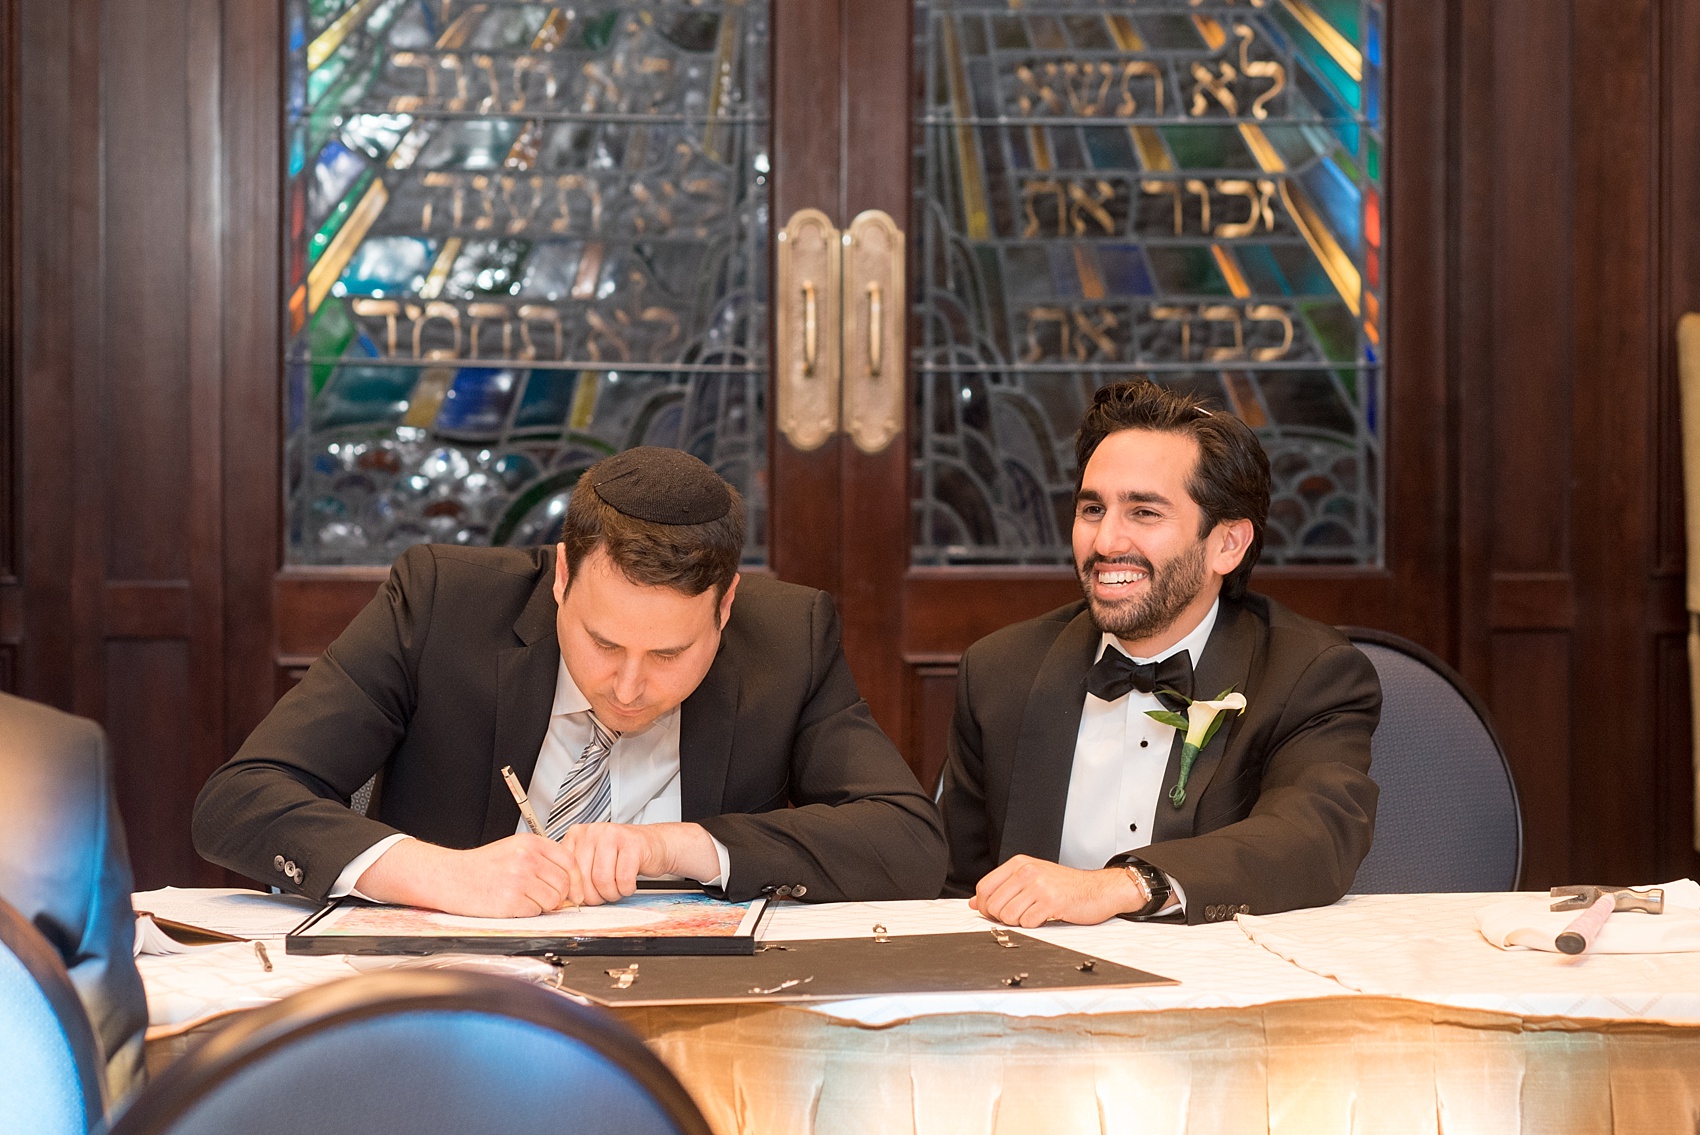 Mikkel Paige Photography photo of the groom at his Jewish religion tish at Temple Emanu-El in Closter, NJ.